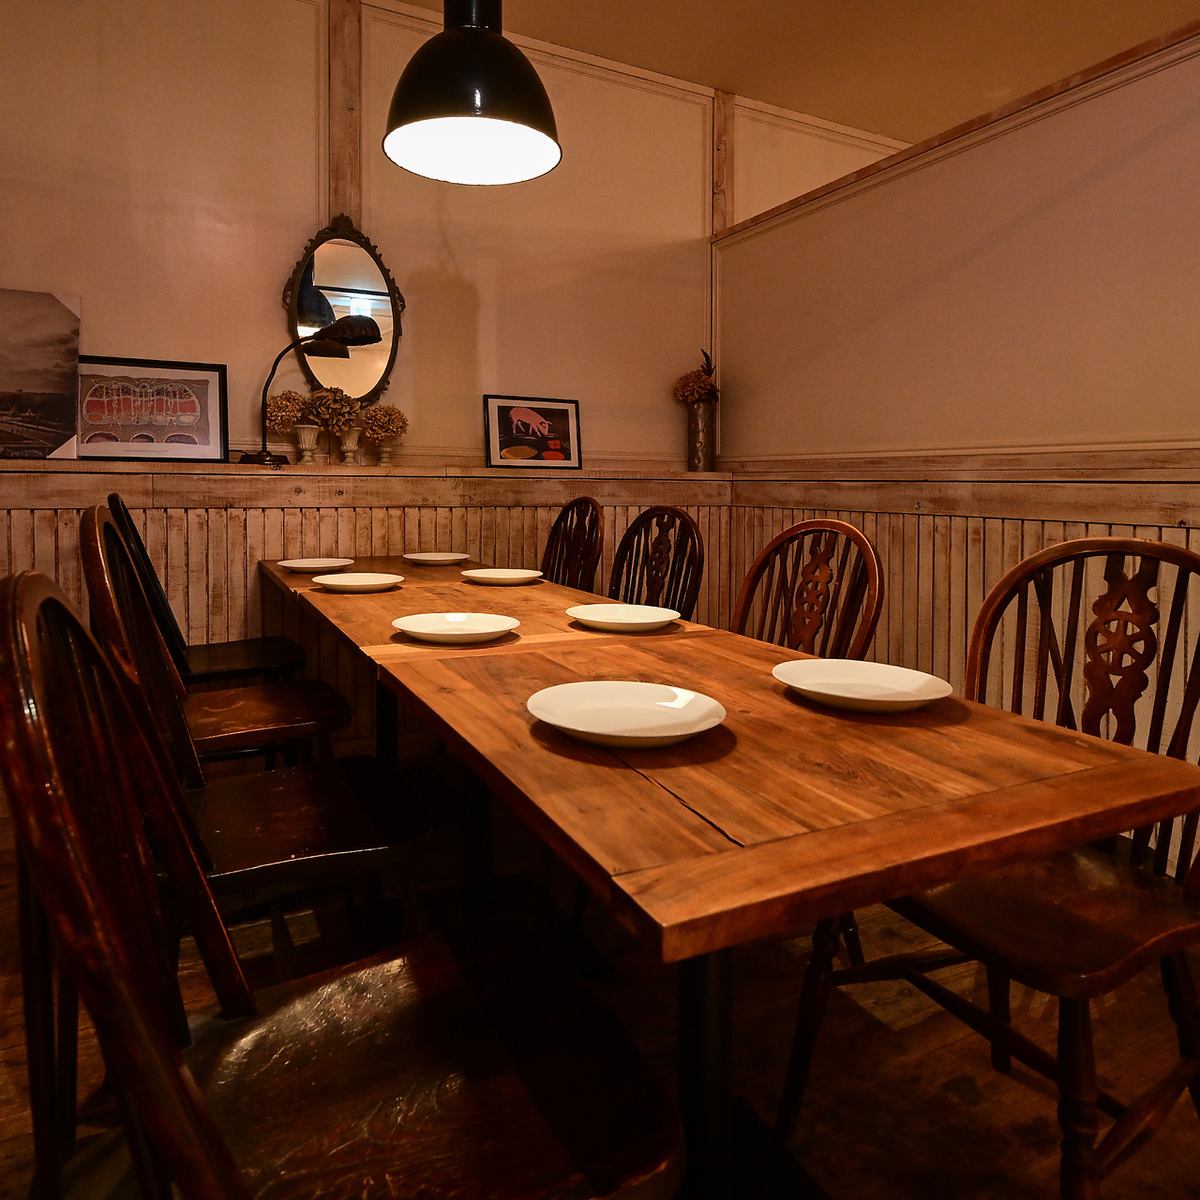 We have antique private rooms that can be used according to the number of people.